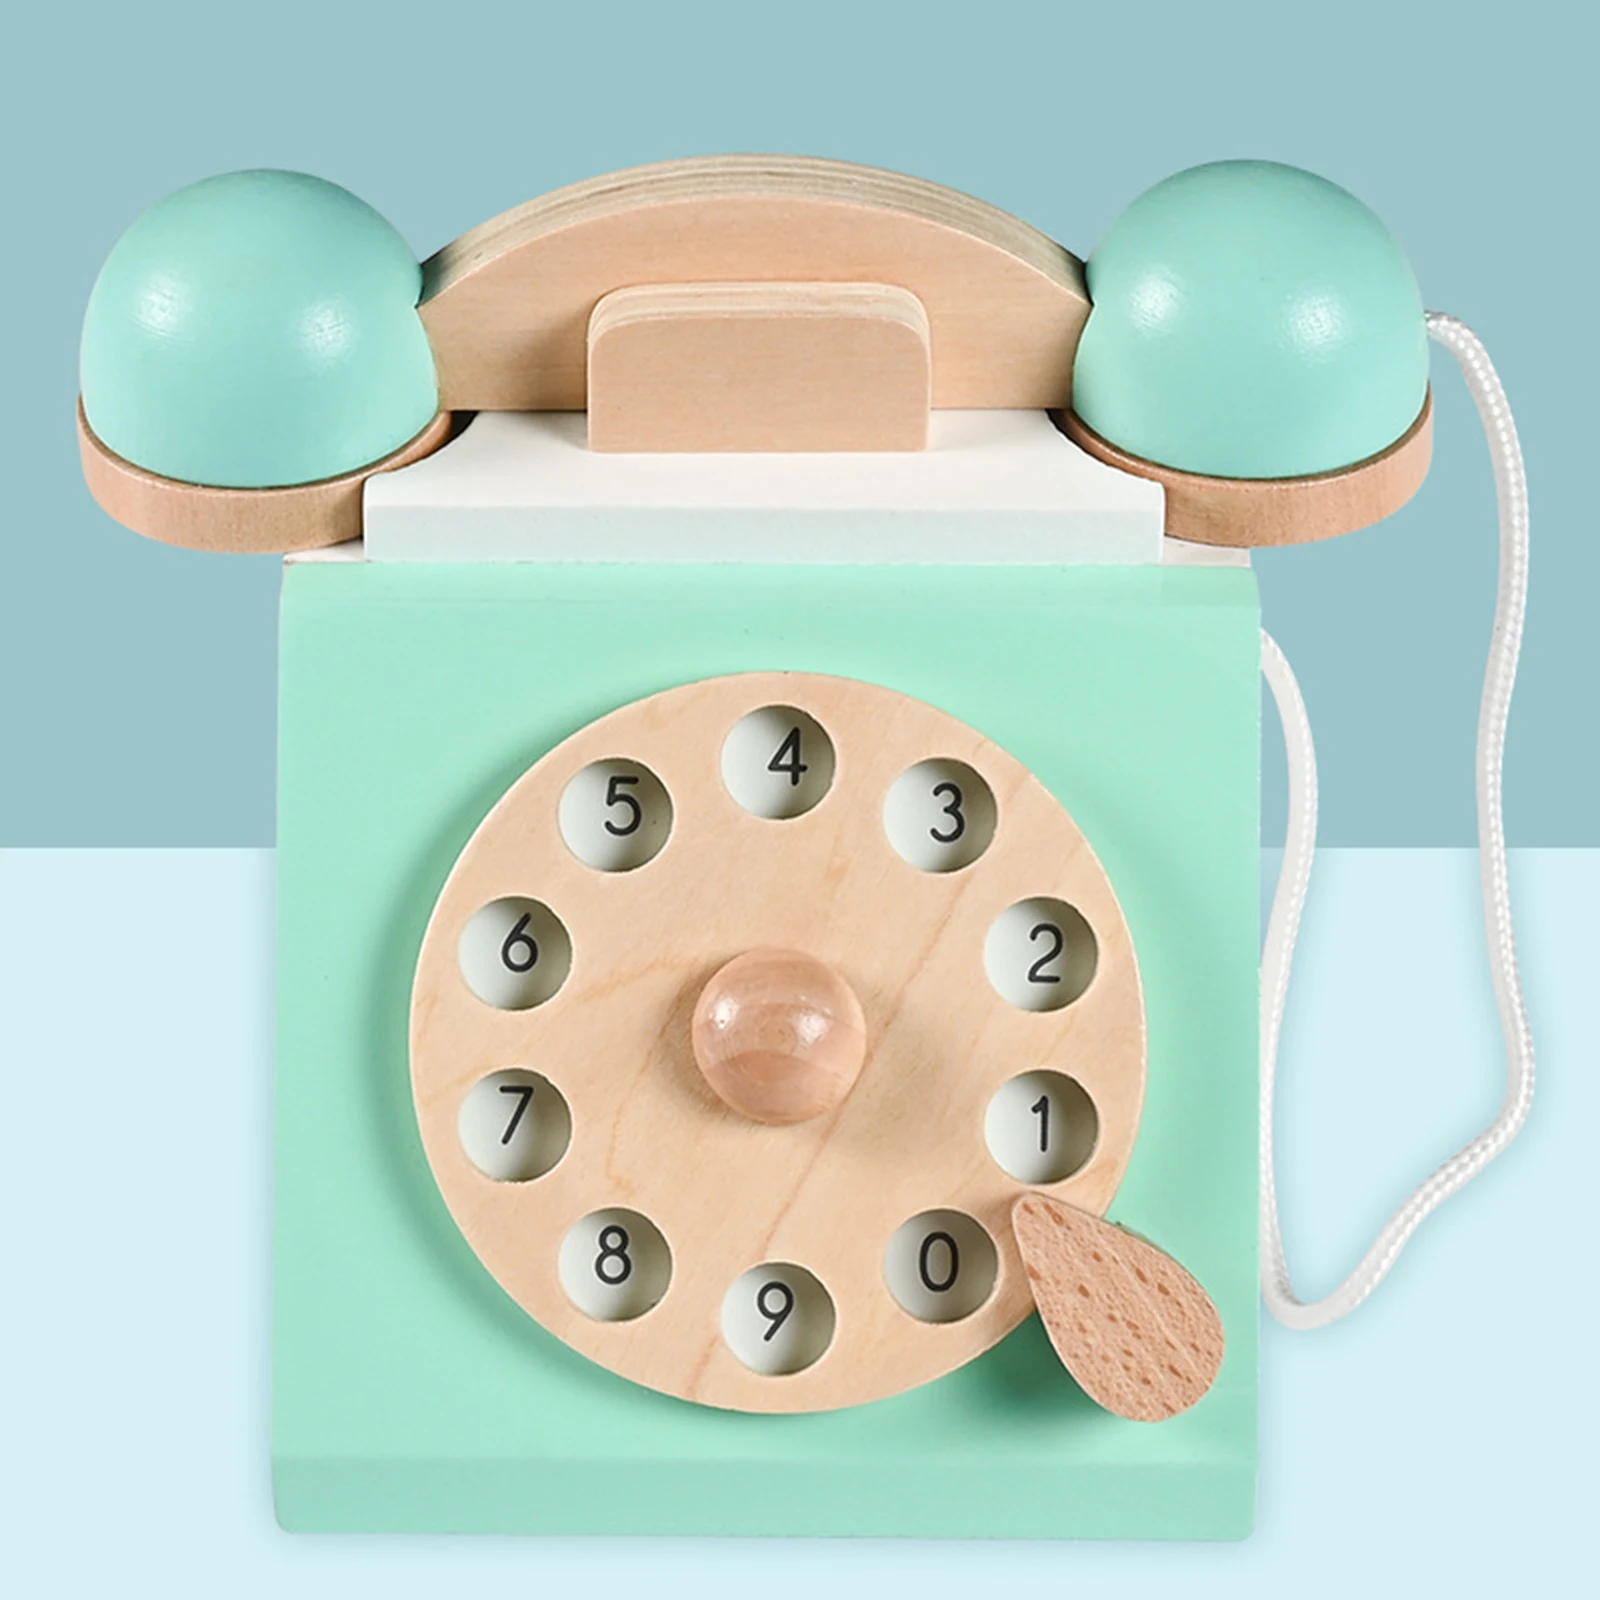 Realistic Retro Vintage Antique Dial Telephone Playset Pretend Play Montessori Early Edcuation Wood Toy Role Play Birthday Gift